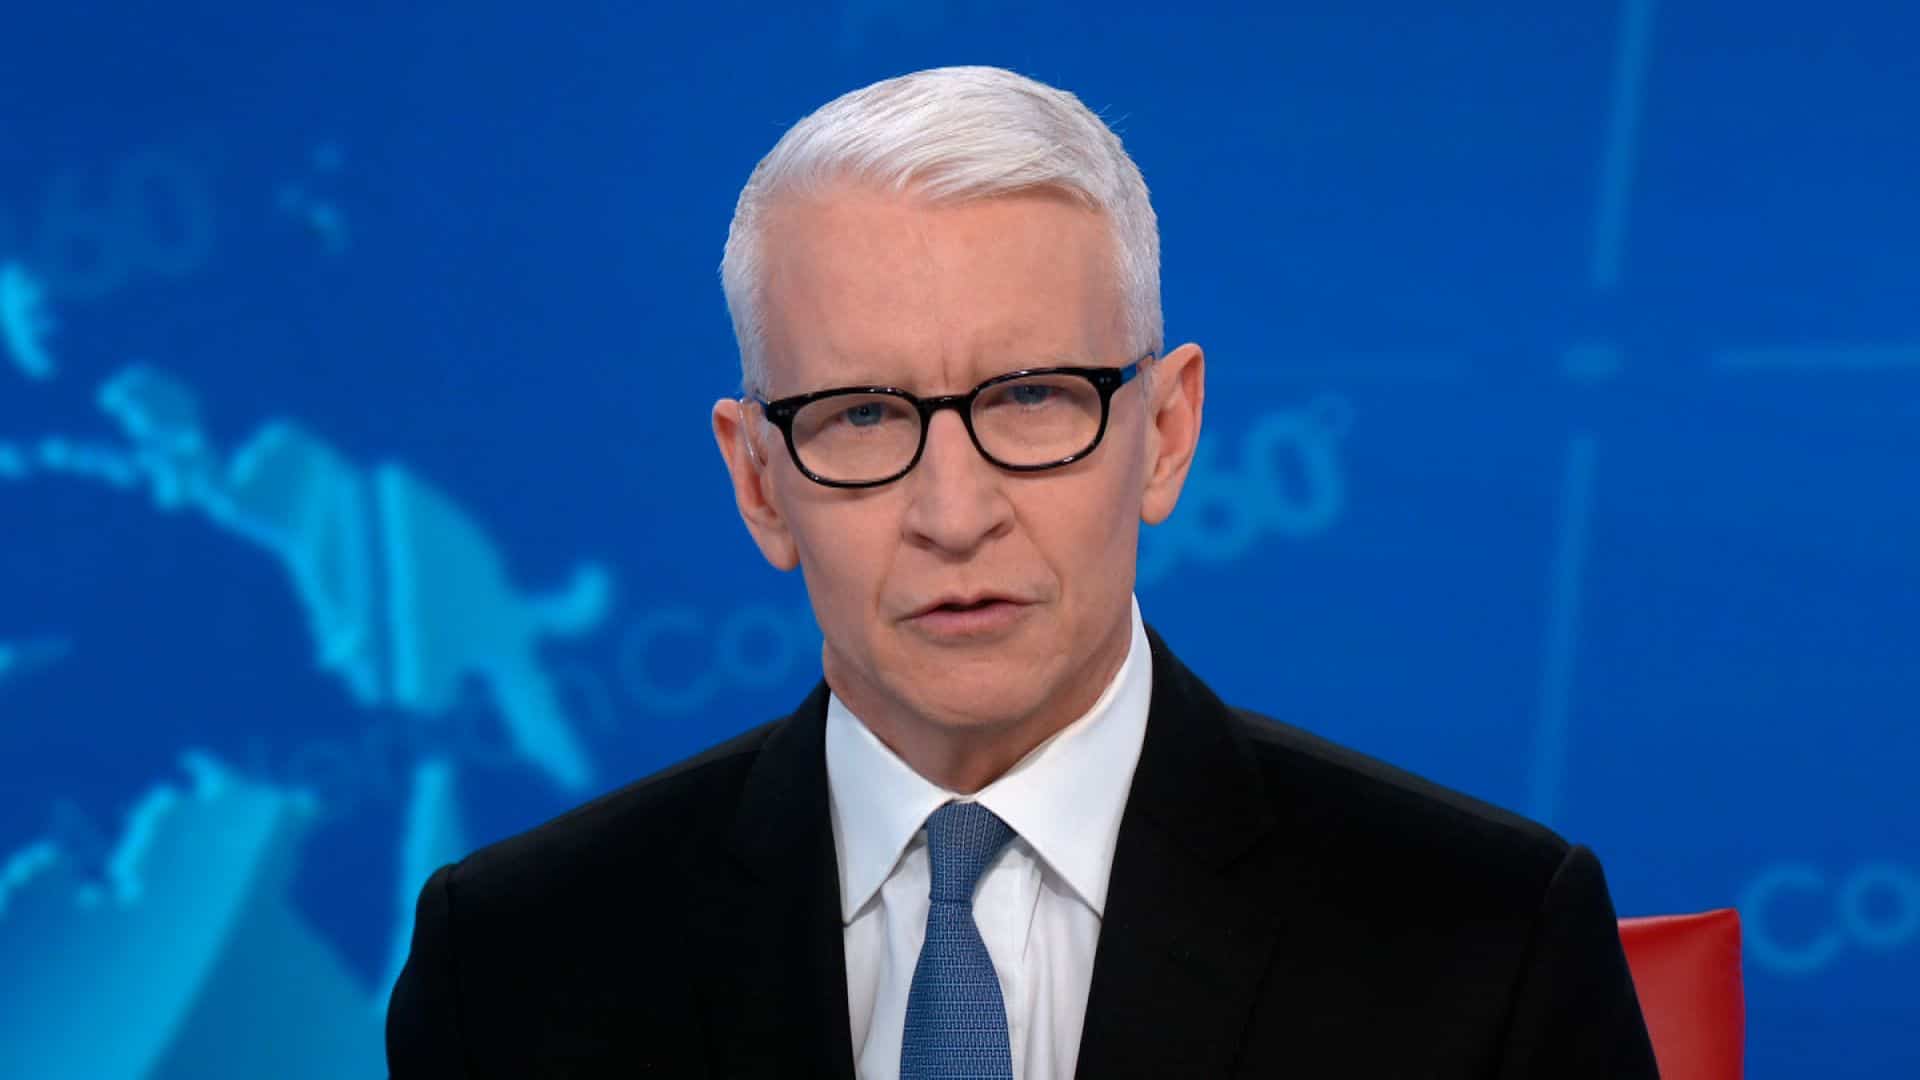 Anderson Cooper's career as a tv news reporter